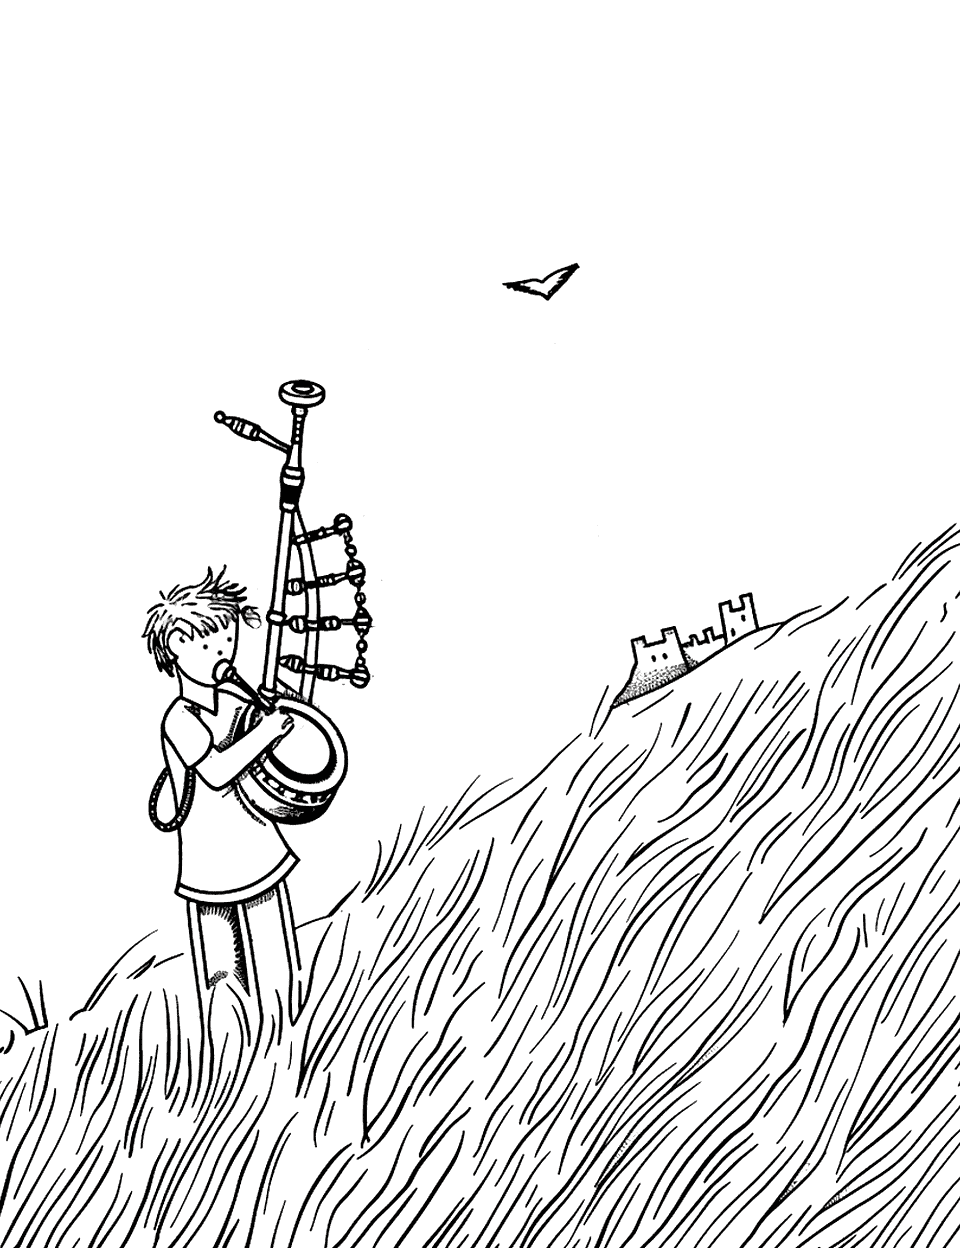 Bagpipe at the Highlands Music Coloring Page - A boy playing bagpipes on a grassy hill with a distant castle in the background.